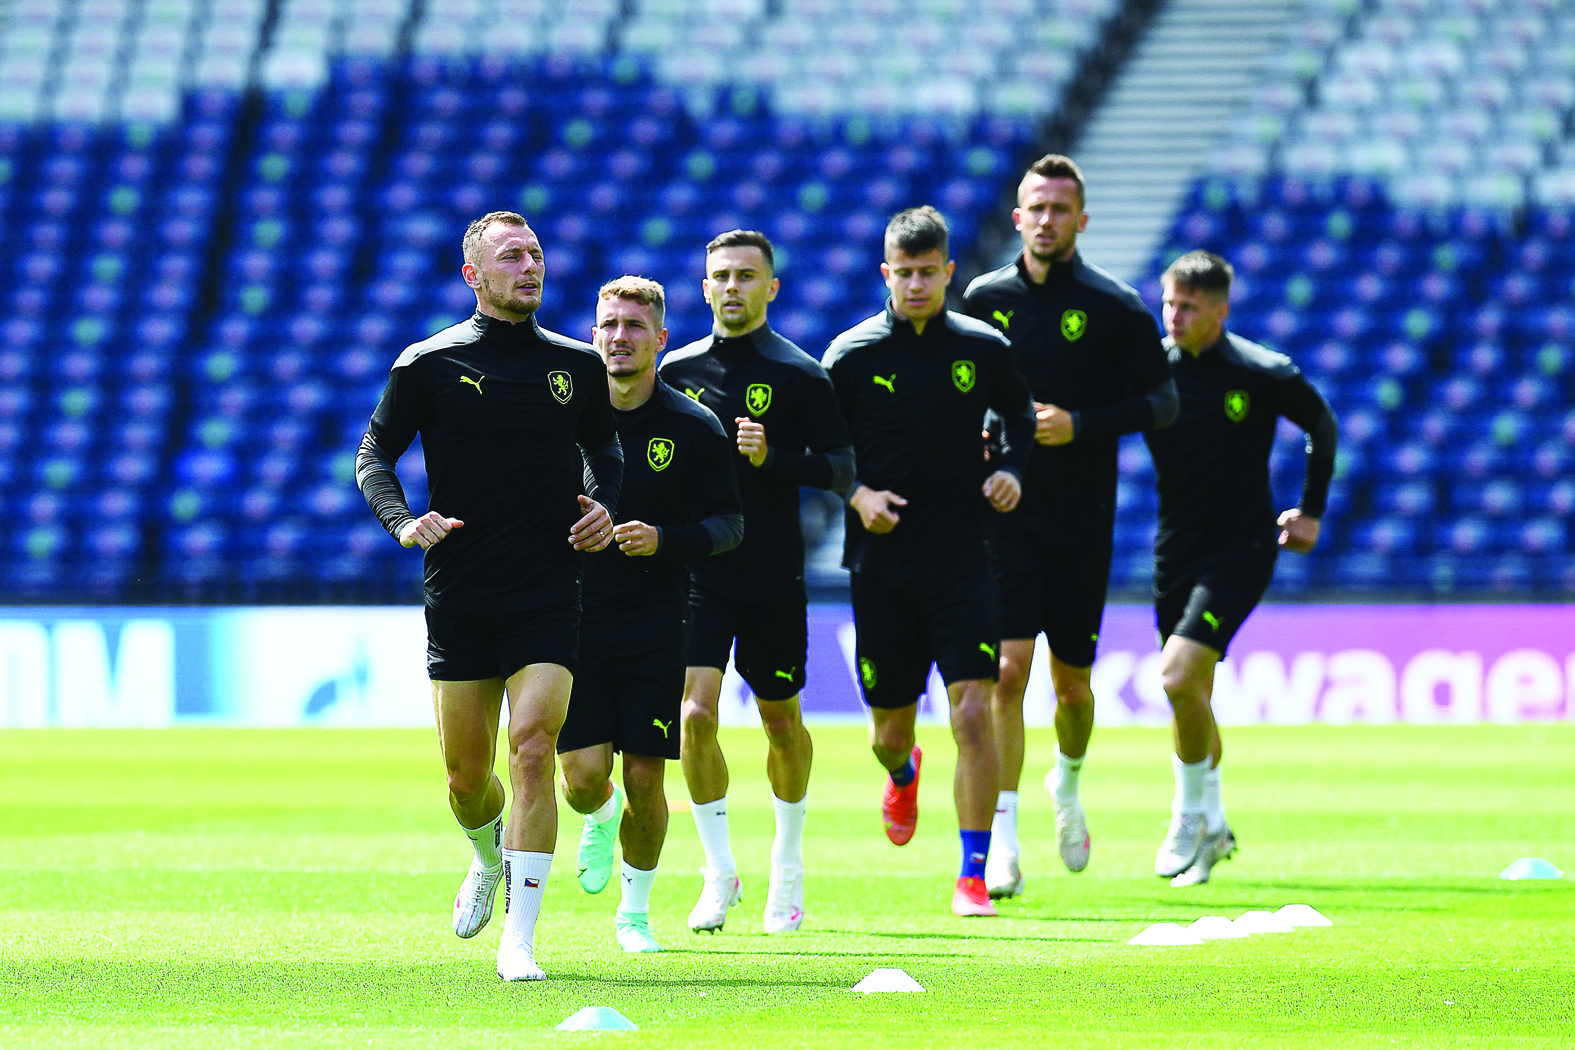 GLASGOW: Czech Republic's players attend an MD-1 training session at Hampden Park in yesterday on the eve of their UEFA EURO 2020 Group D football match against Scotland. - AFP n